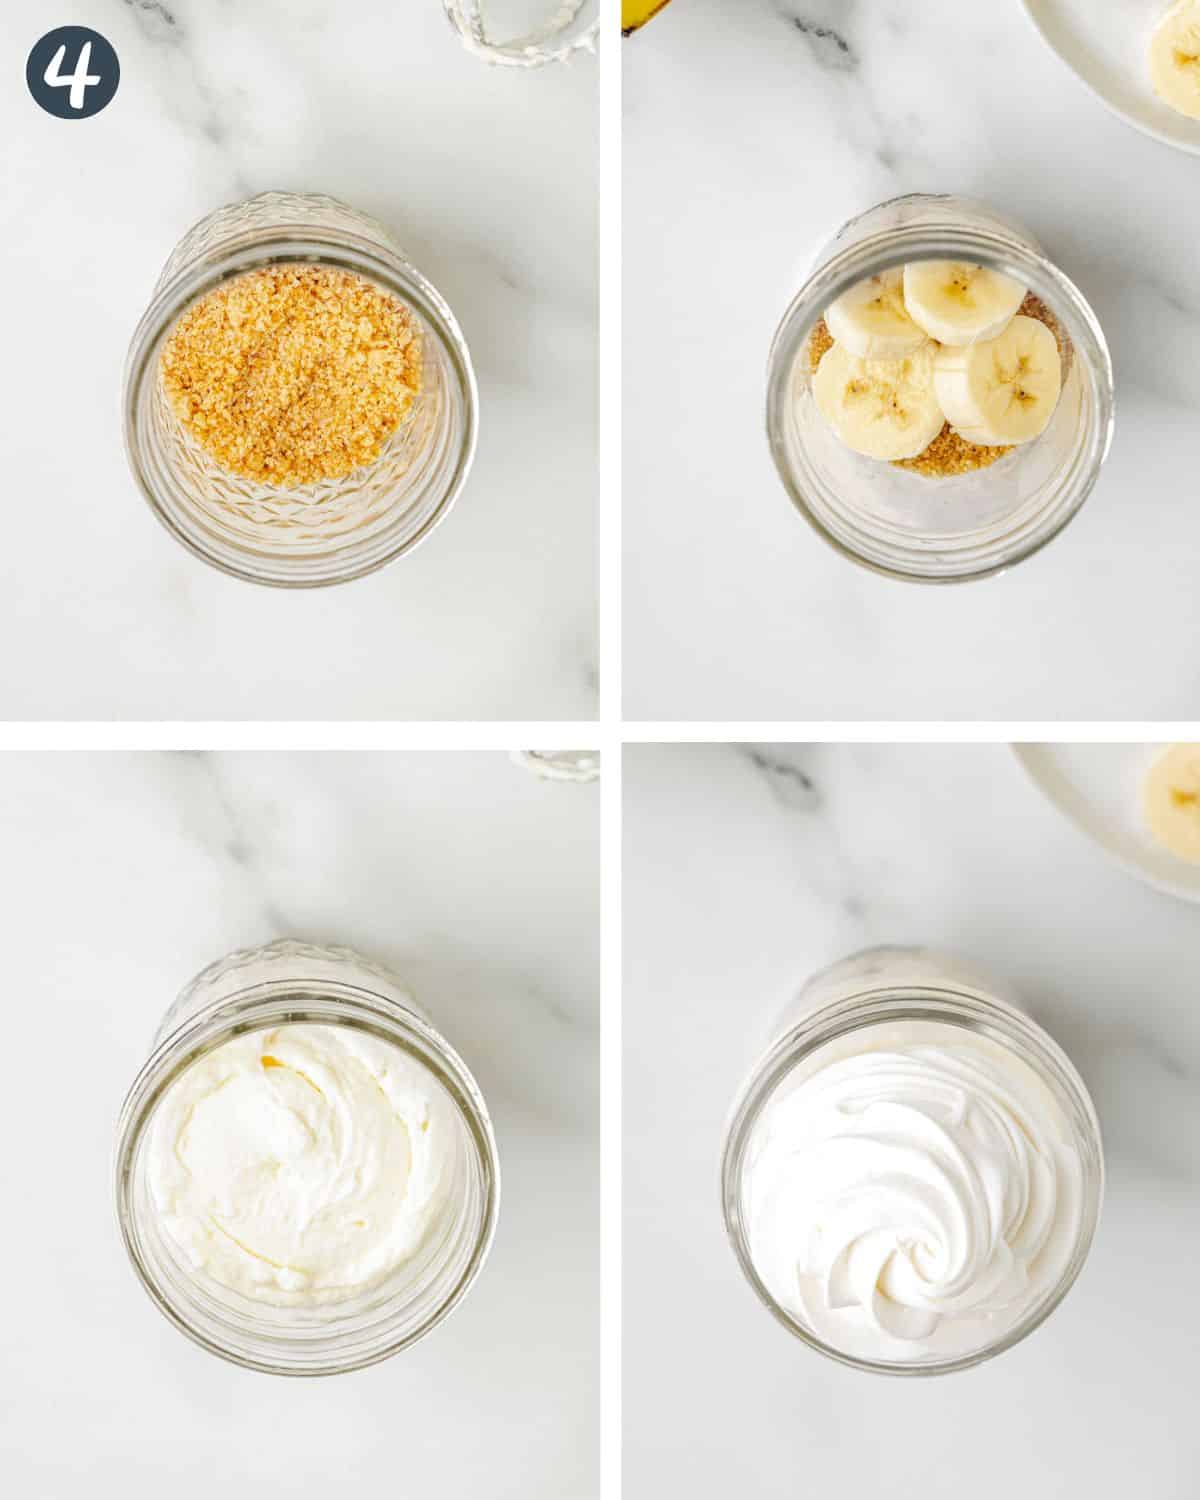 Showing the 4 steps to layer in mason jar: crumbs, fruit, filling, whipped cream.